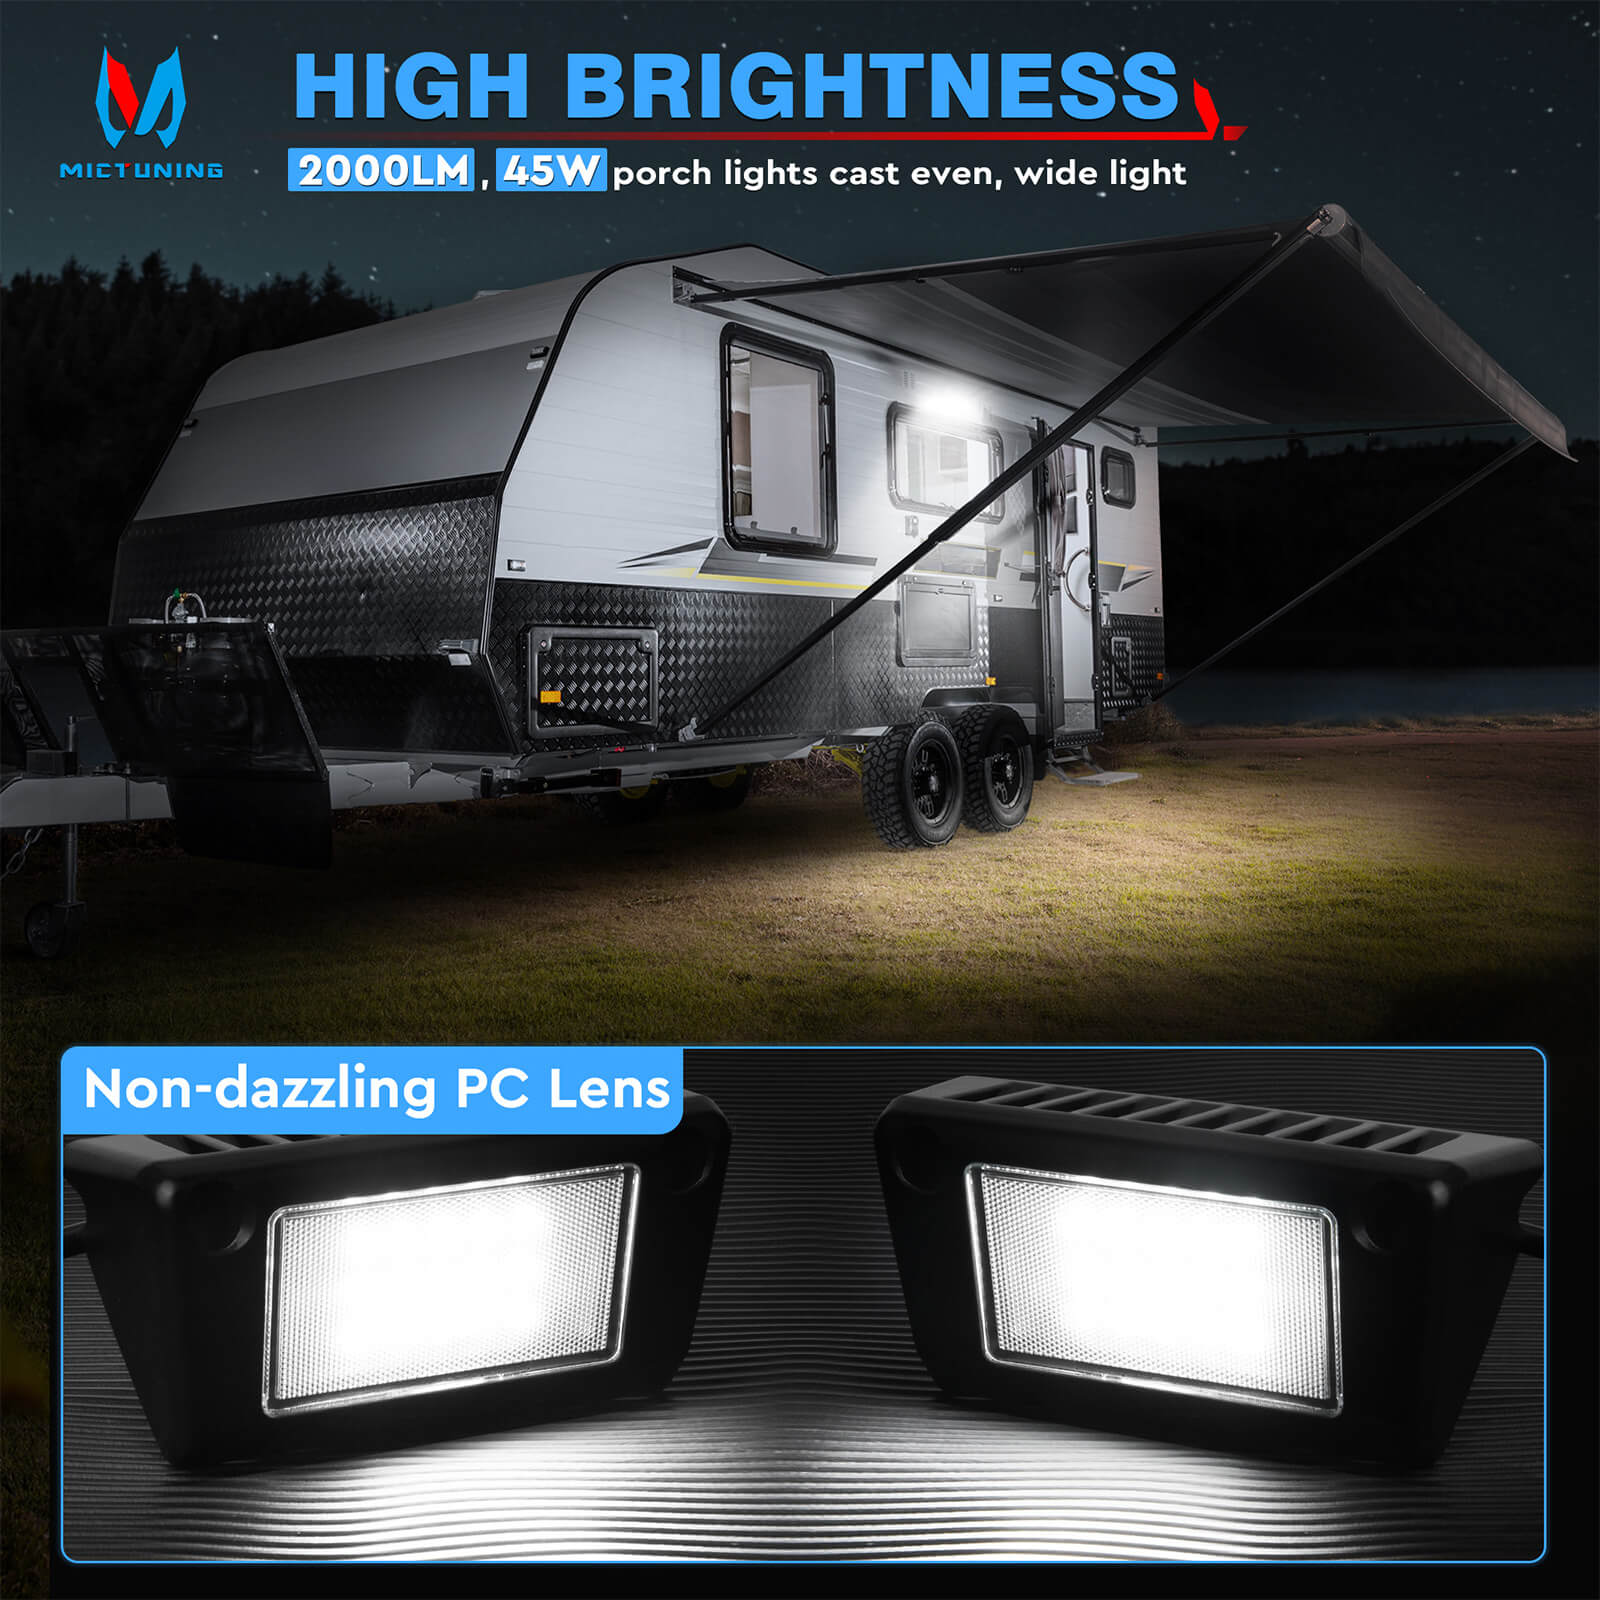 Upgraded 2pcs RV Porch Lights 5 Inch 45W LED Exterior Utility Awning Light 2000LM 6000K, Aluminum Housing IP67 Waterproof